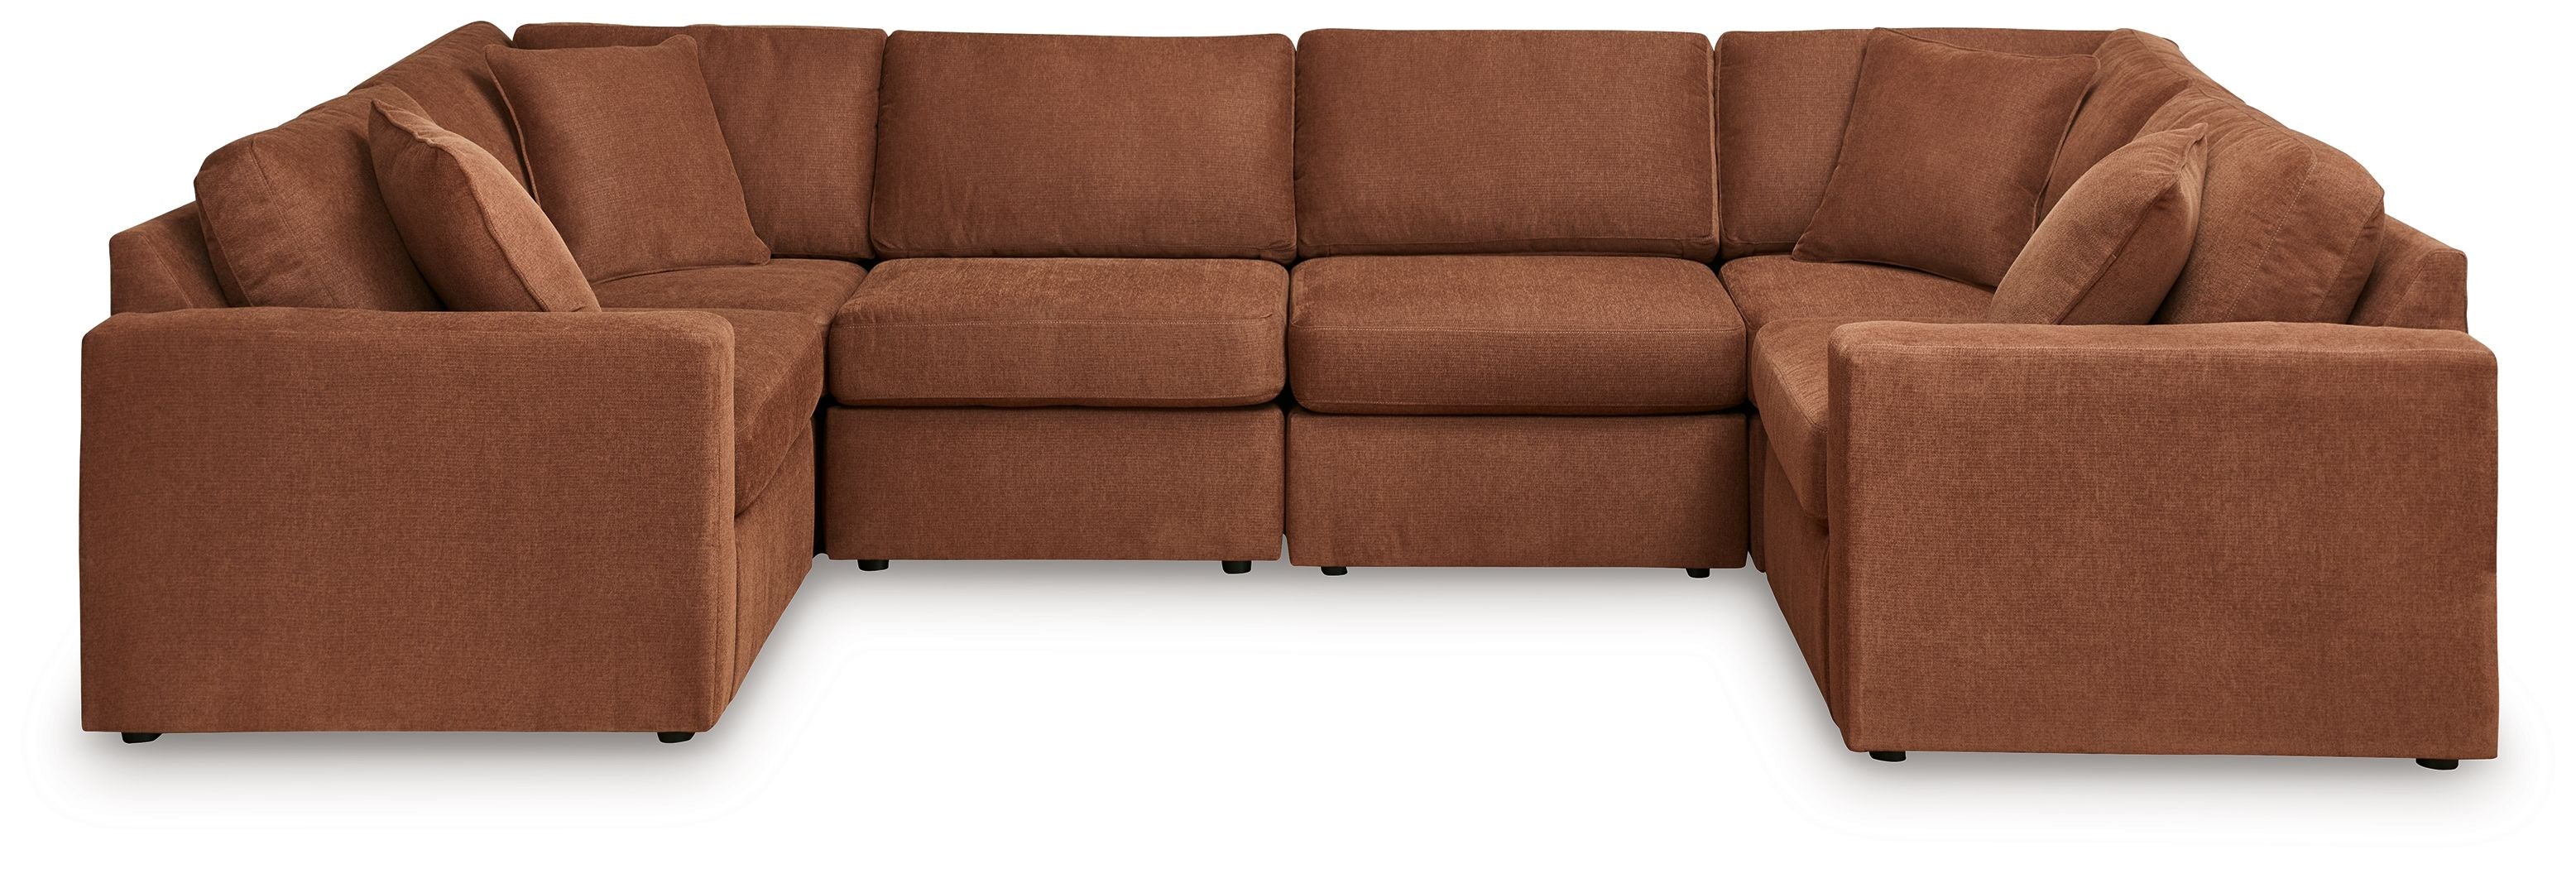 Modmax 6 Piece Modular U Shaped Sectional-Stationary Sectionals-American Furniture Outlet